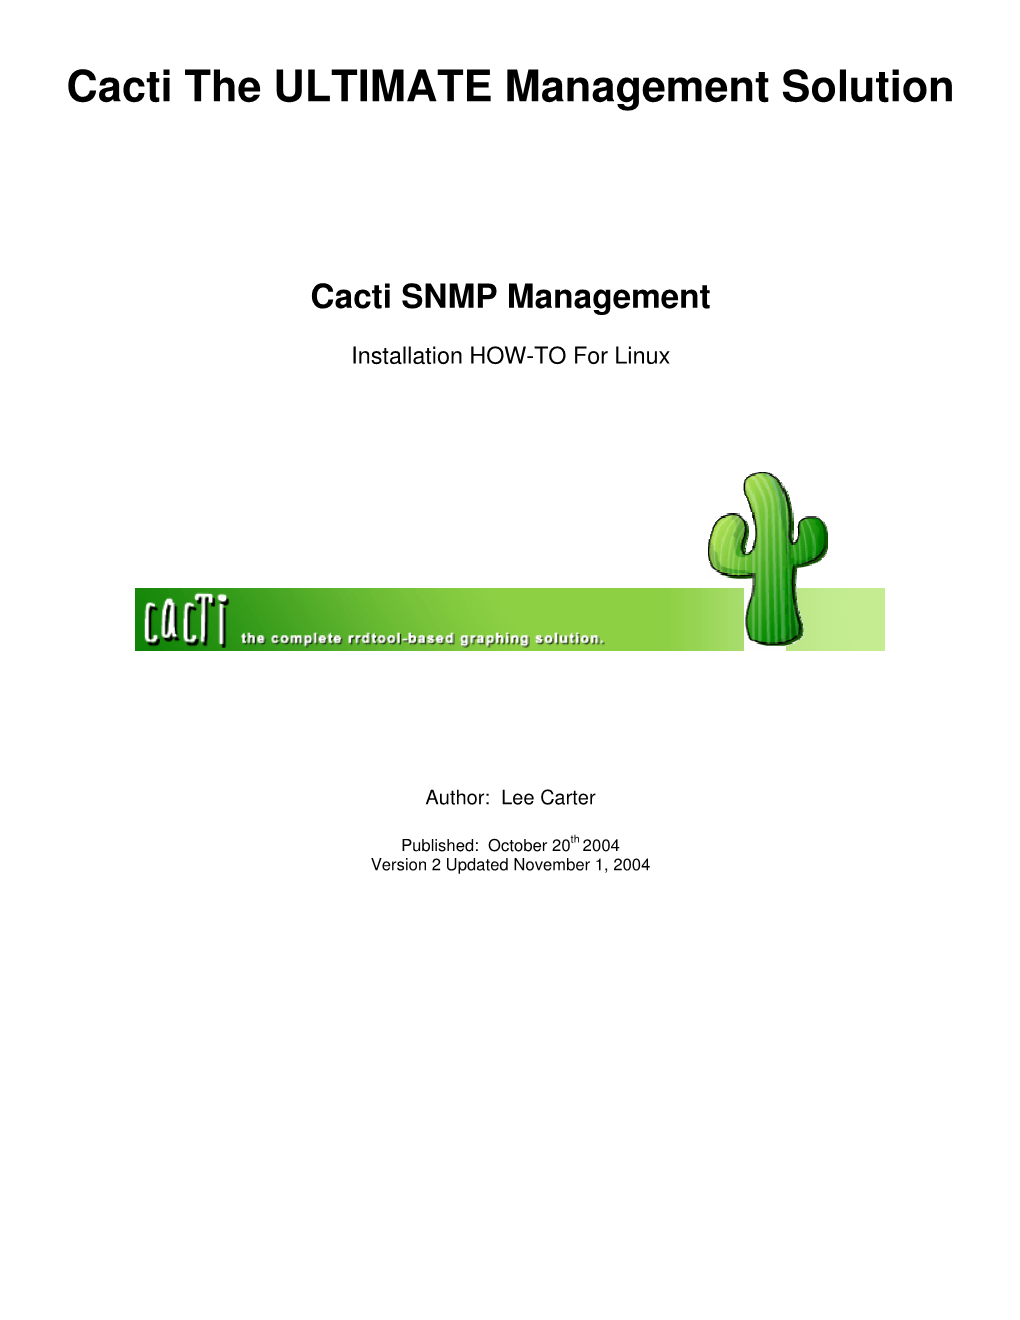 Cacti the ULTIMATE Management Solution